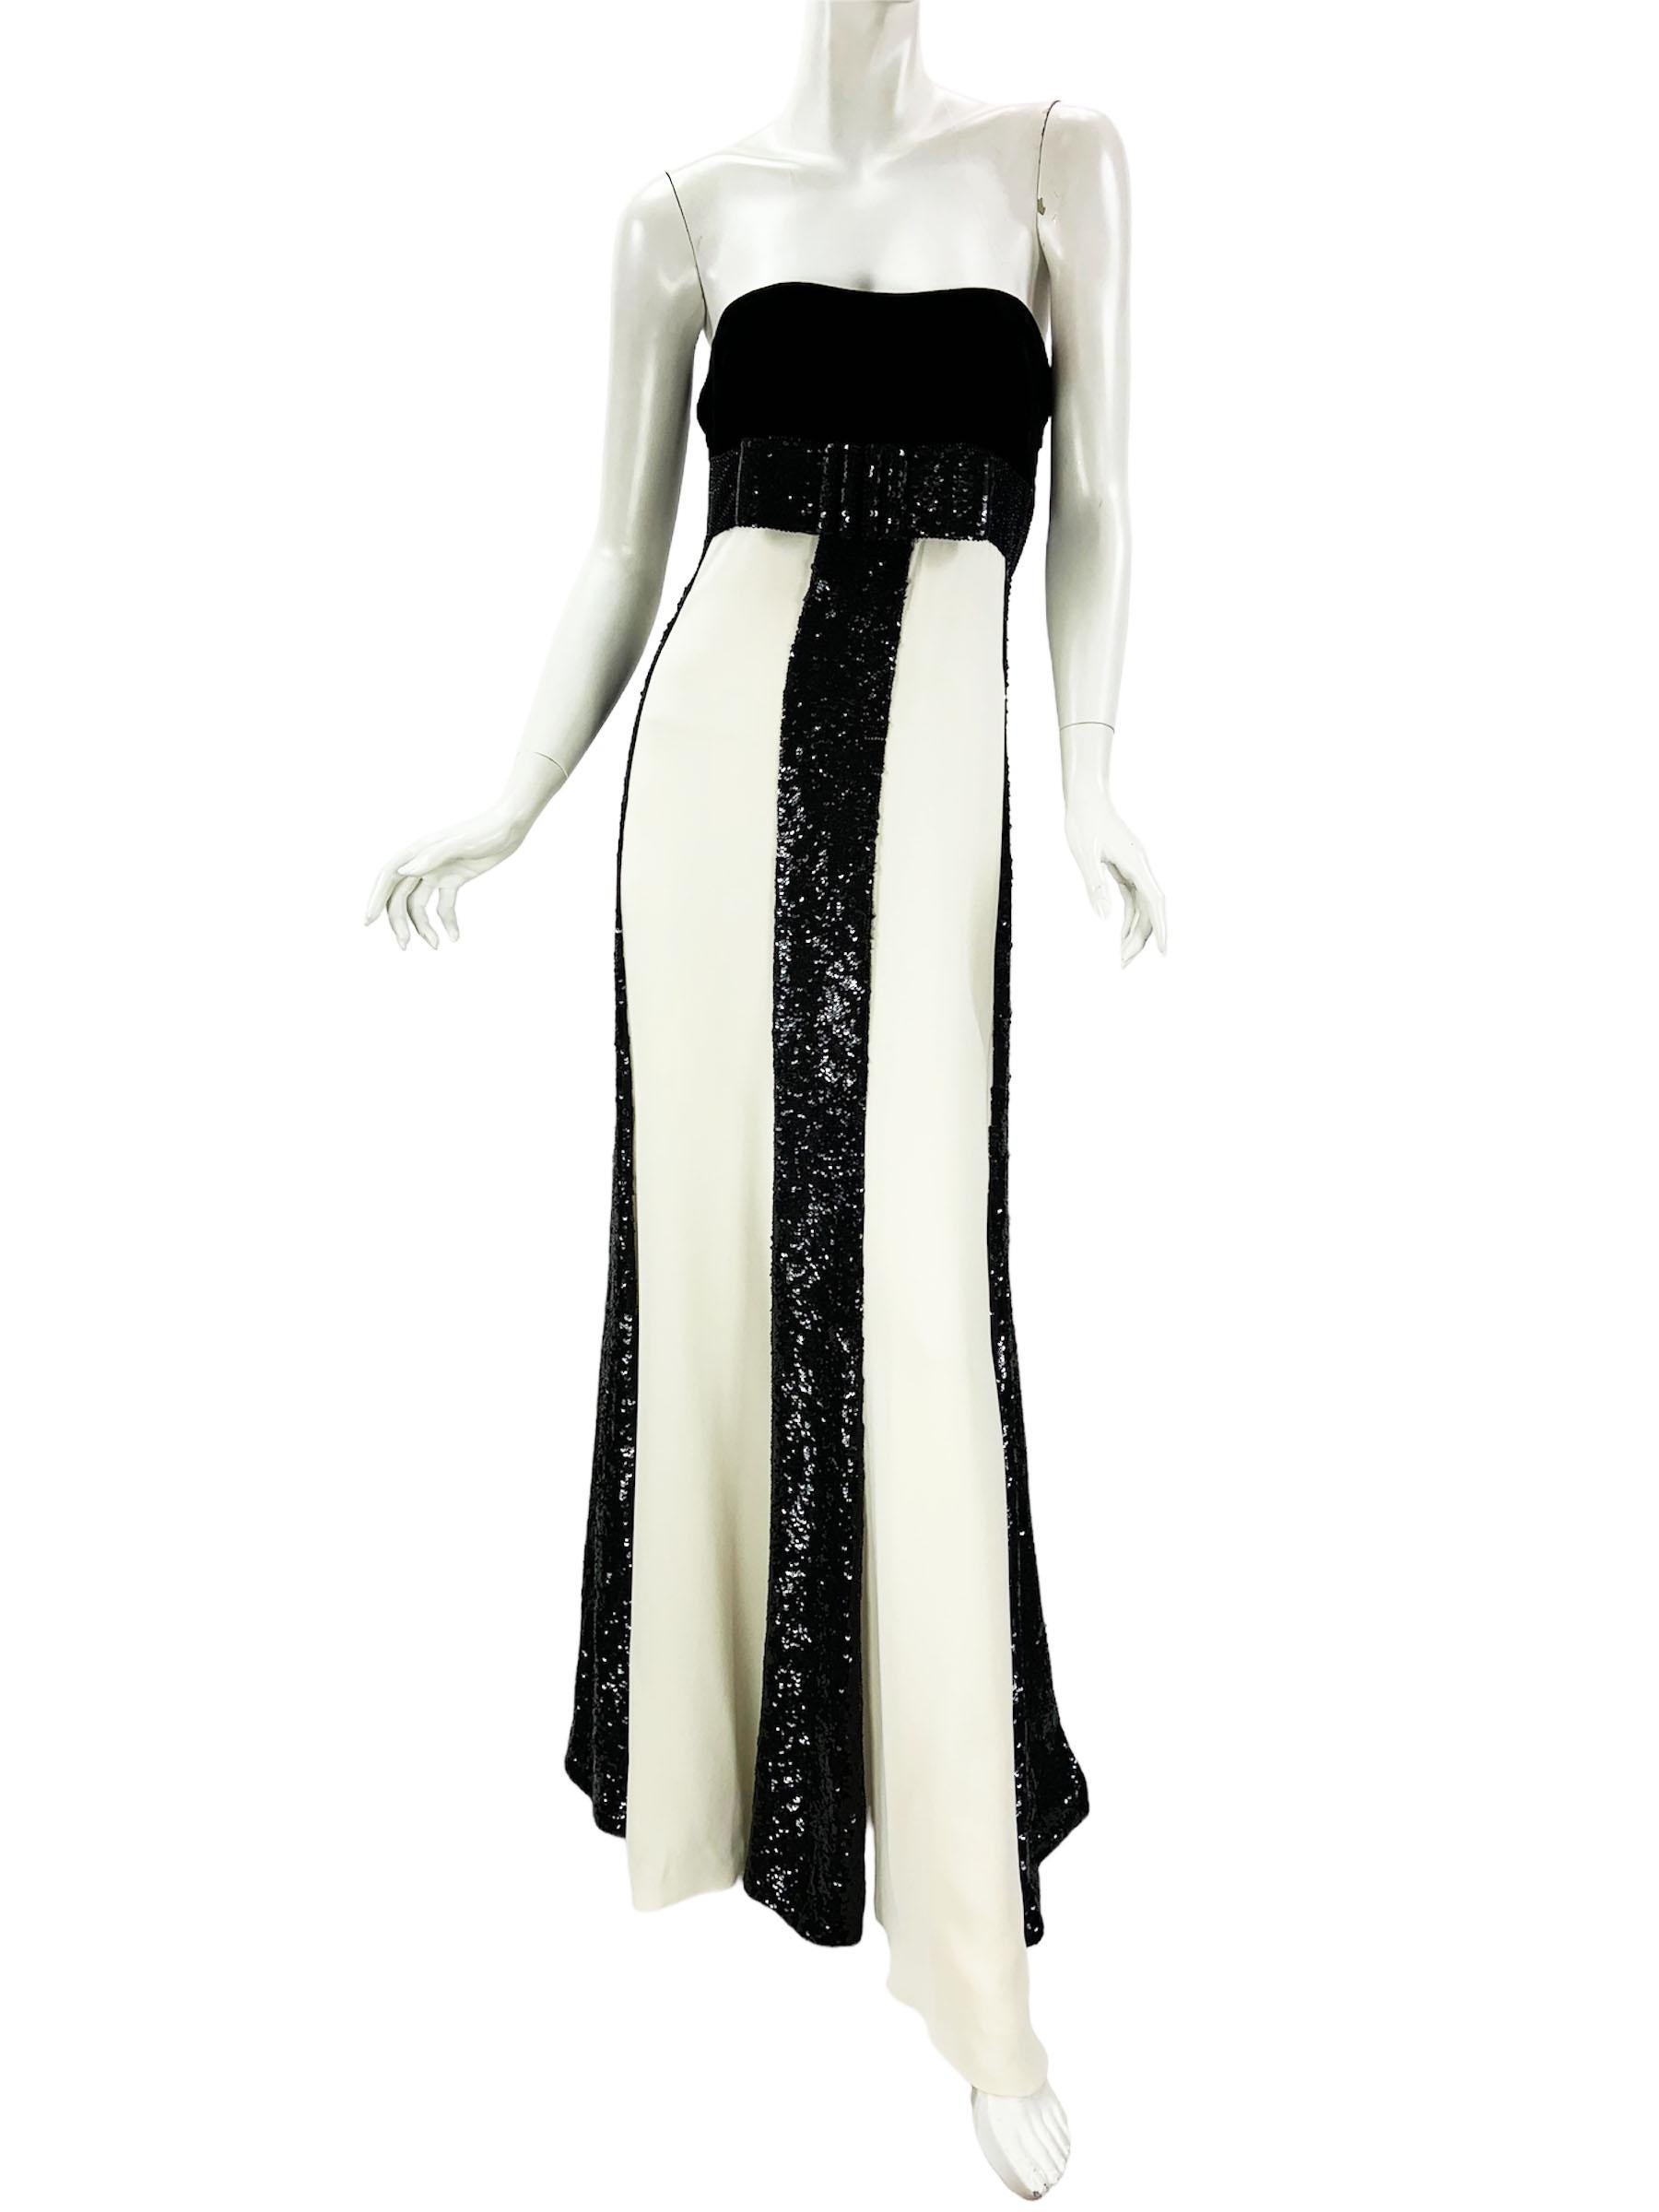 Valentino Runway Red Carpet Black White Bow Accent Embellished Dress Gown US 8 1